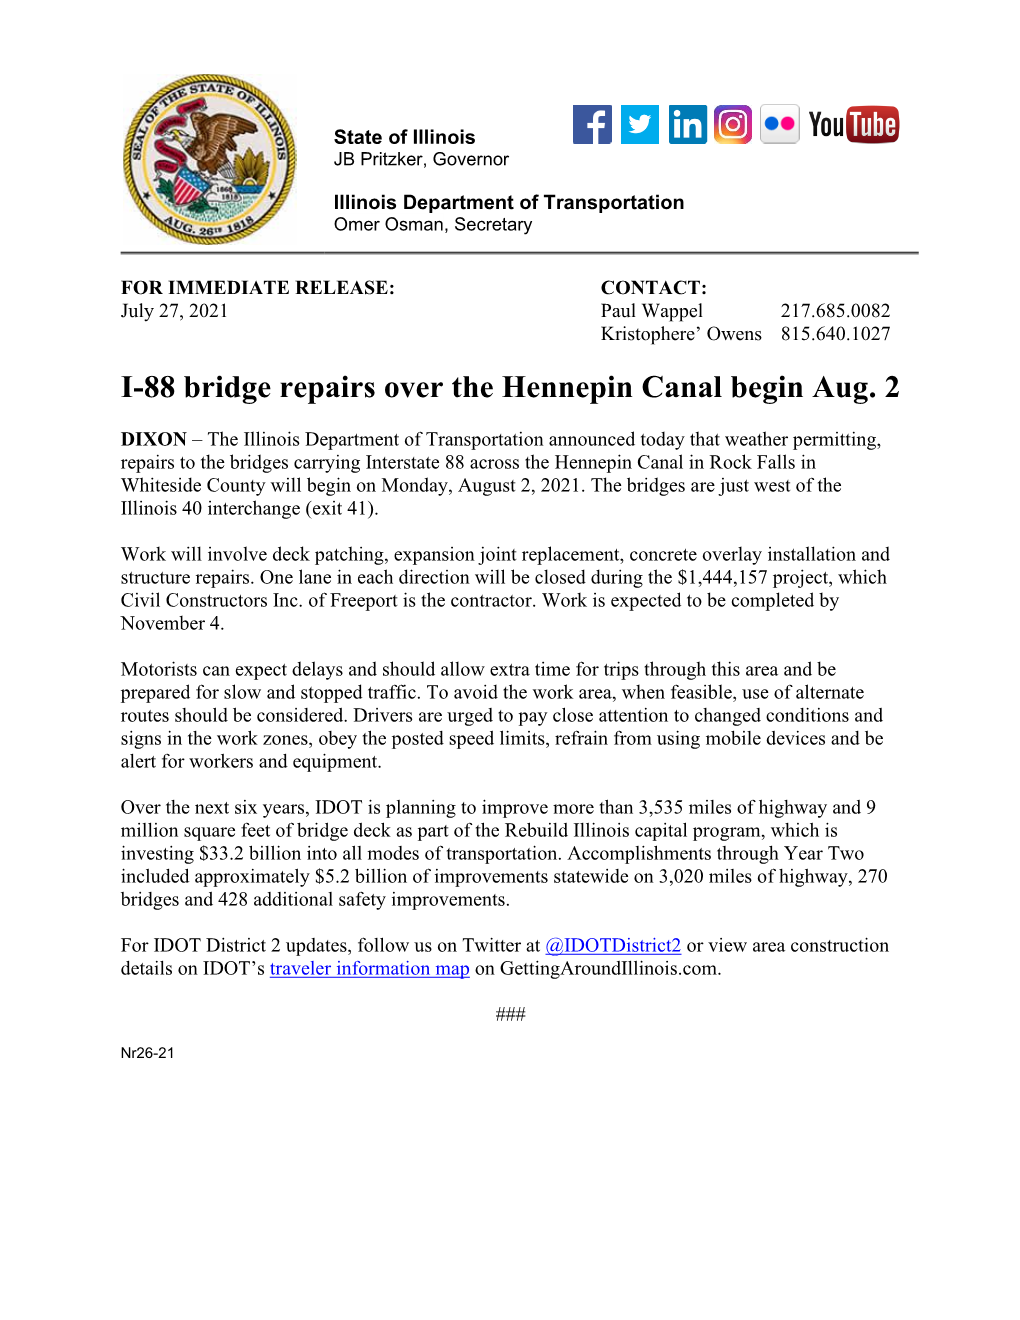 I-88 Bridge Repairs Over the Hennepin Canal Begin Aug. 2